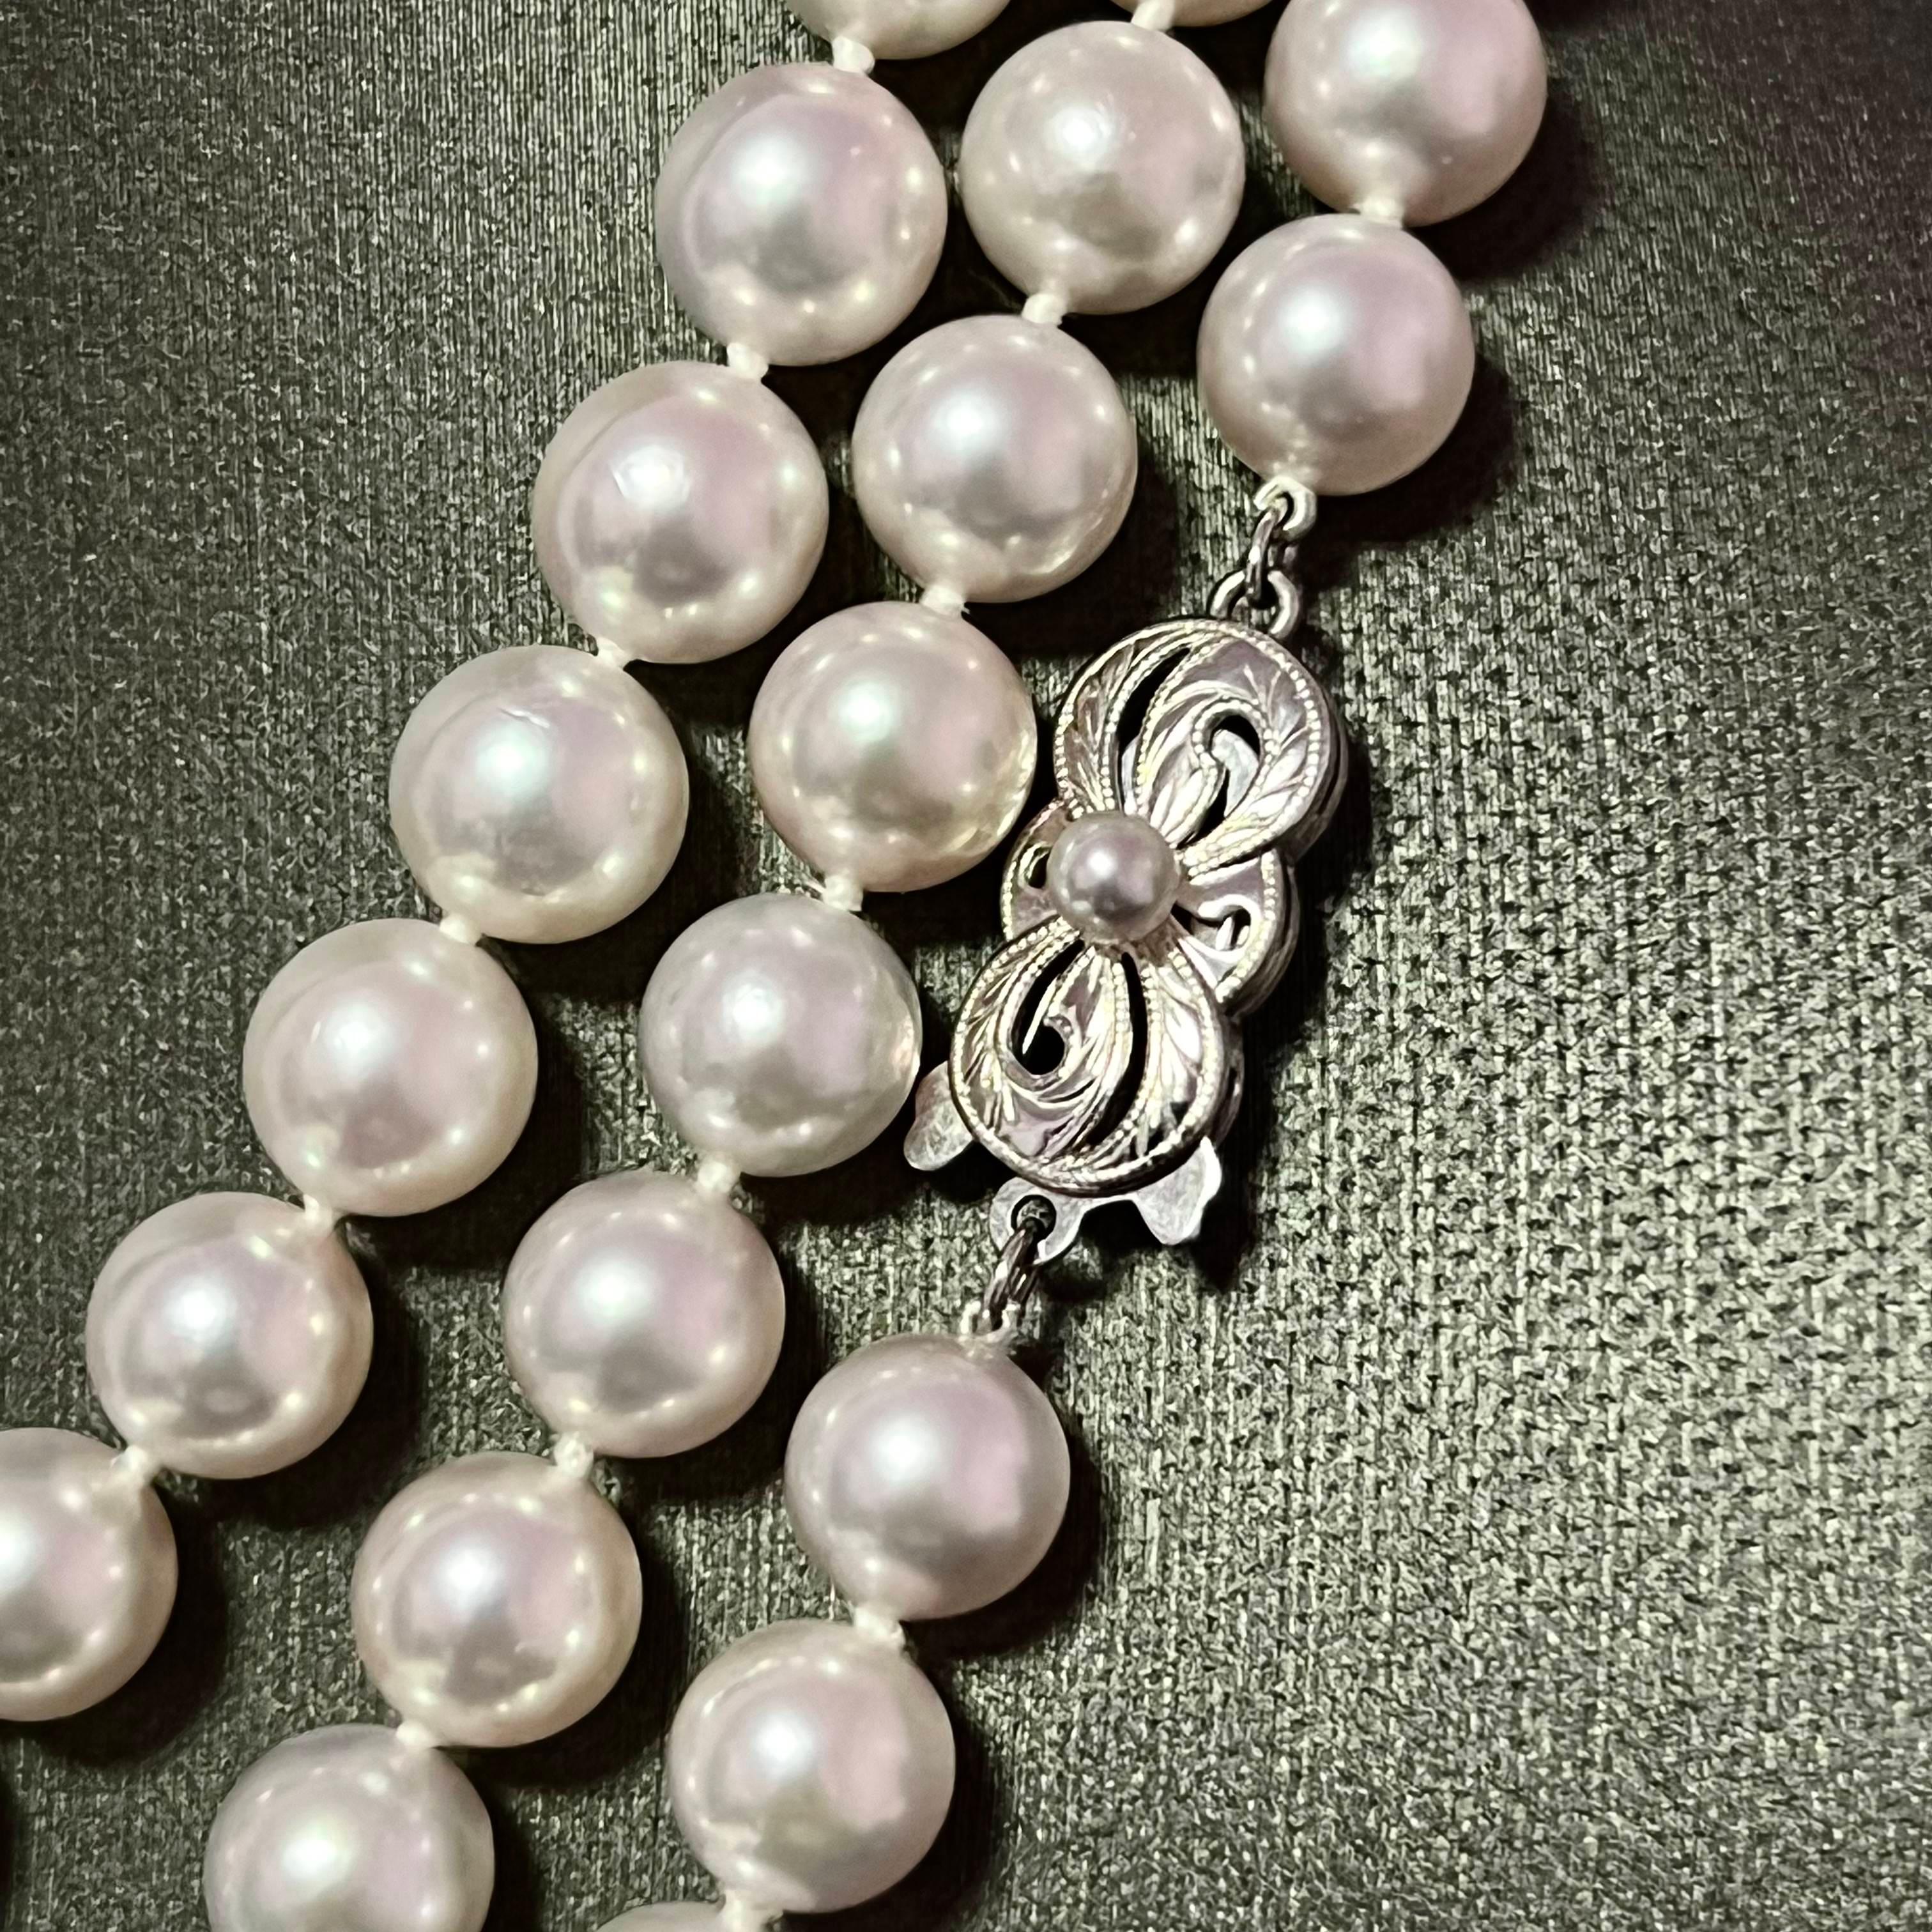 Fine Quality Mikimoto Estate Akoya Pearl Necklace 18k W Gold 8.00 mm Certified $12,975 217059

Nothing says, “I Love you” more than Diamonds and Pearls!

This Akoya pearl necklace has been Certified, Inspected, and Appraised by Gemological Appraisal